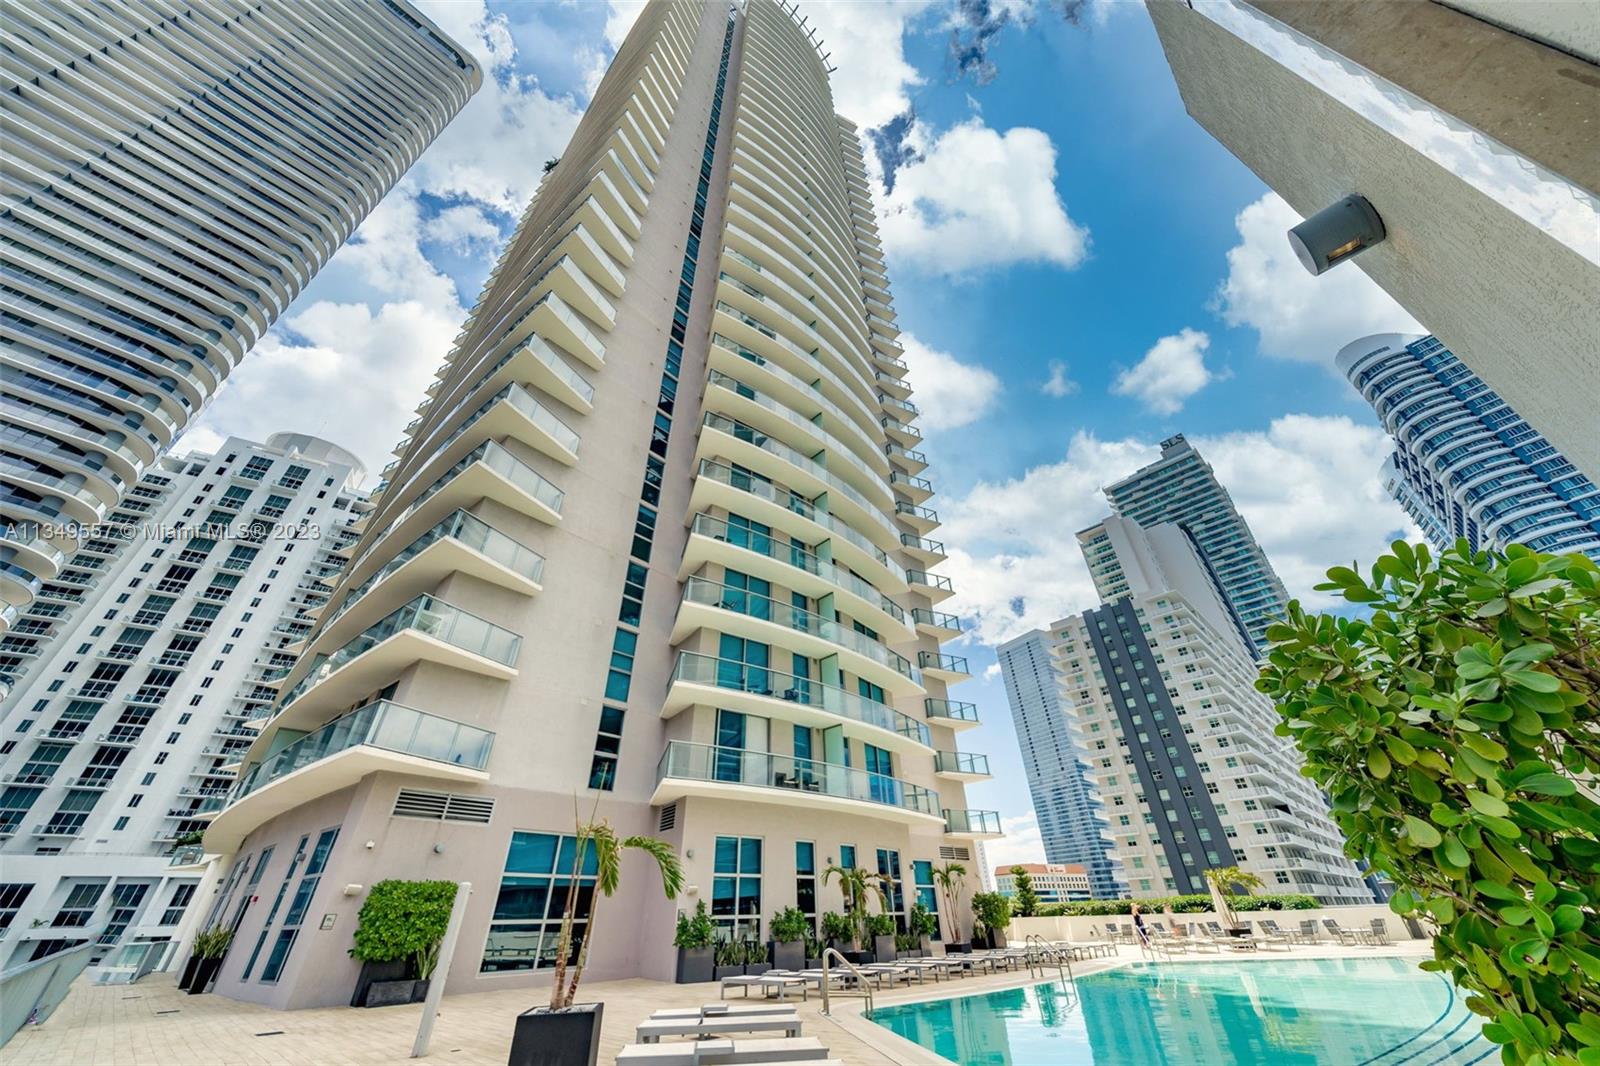 LOCATION LOCATION LOCATION!!! great 2/2, Absolutely luxury living. Walking distance to restaurants, shops, Mary Brickell Village & Brickell City Centre, metro mover, Trolley, Pictures speak for themselves. Property won’t last!